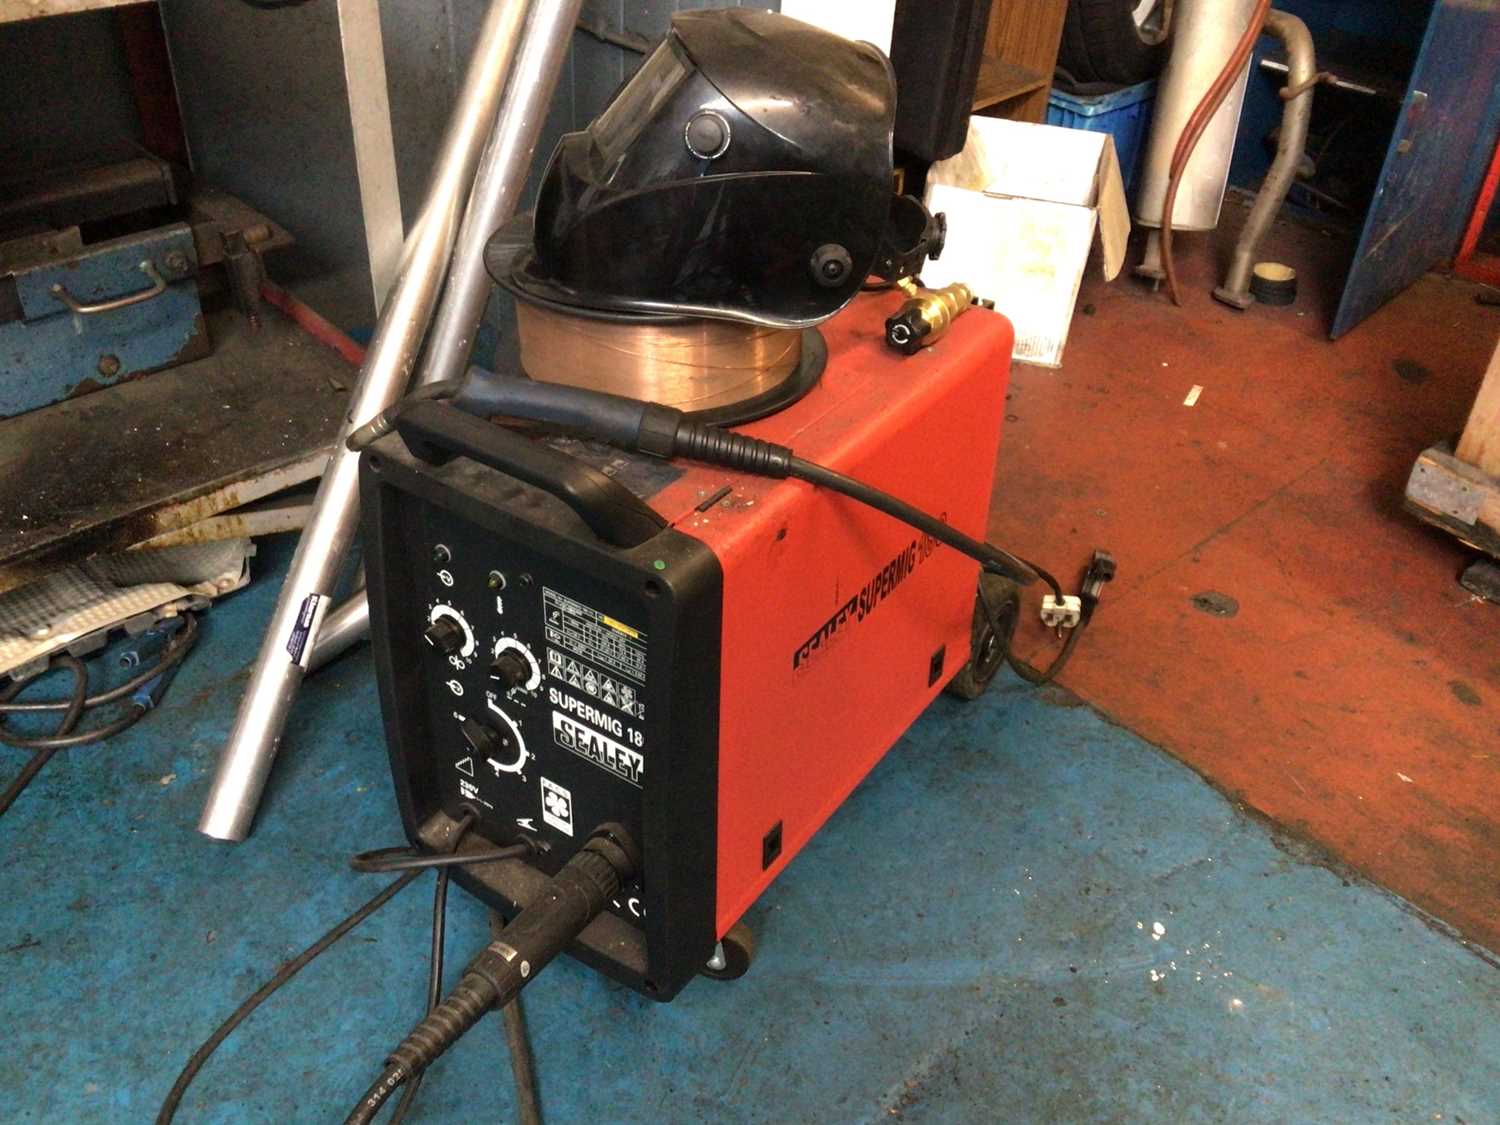 Lot 69 - Sealey Supermig 180 welding machine, with gas bottle, wire and protective visor